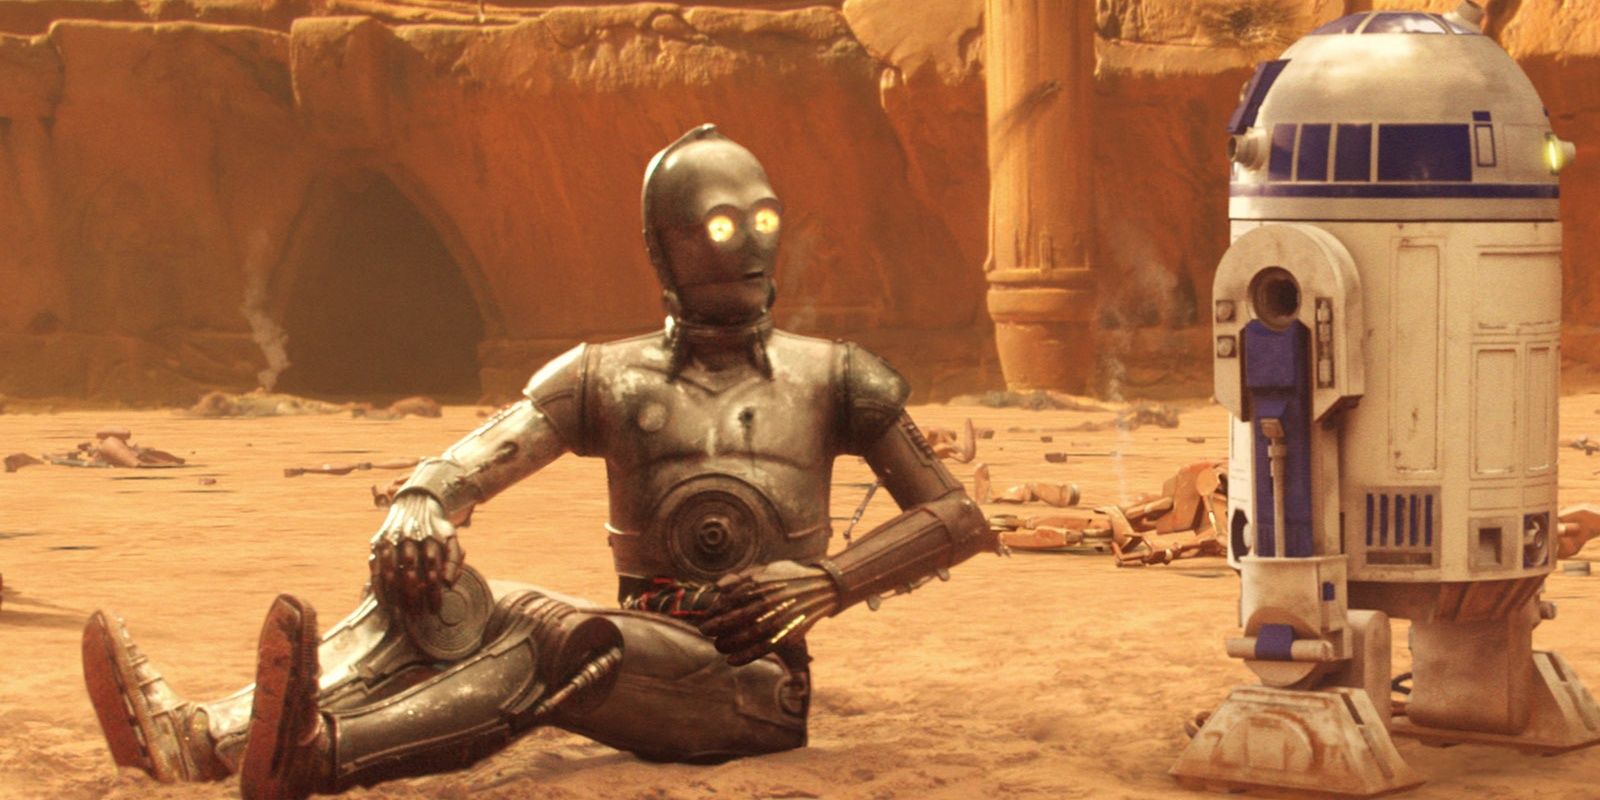 C-3PO and R2-D2 in Attack of the Clones.